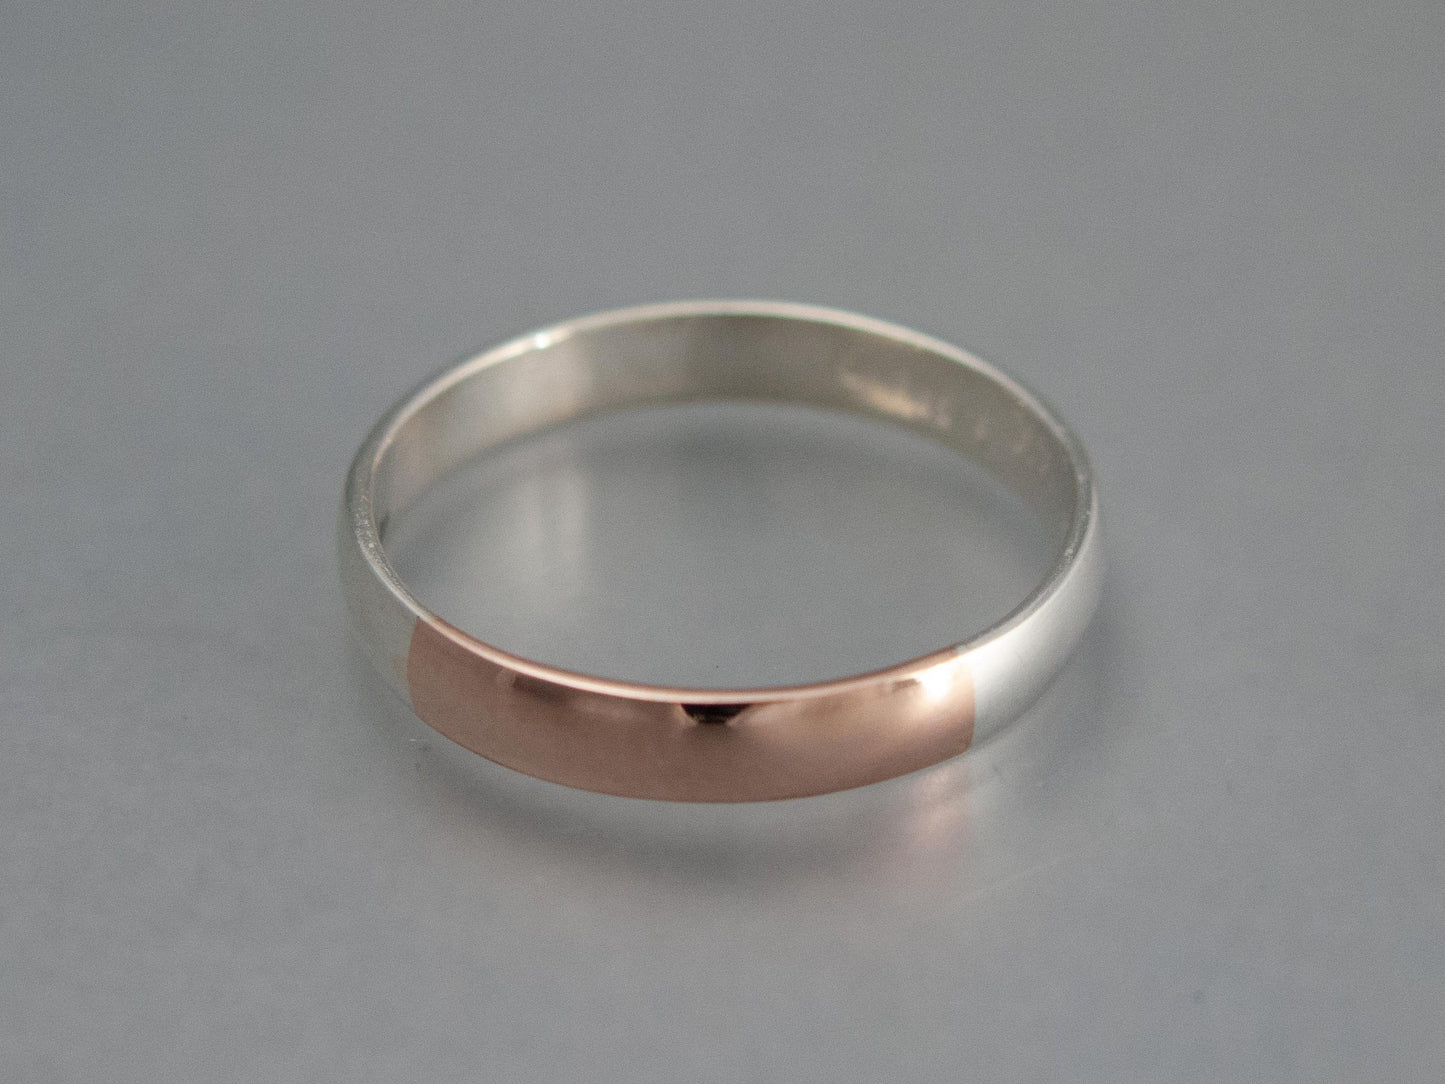 Wide Mixed Metals Wedding Band | Low Domed Band in Sterling Silver with 14k Rose or Yellow Gold